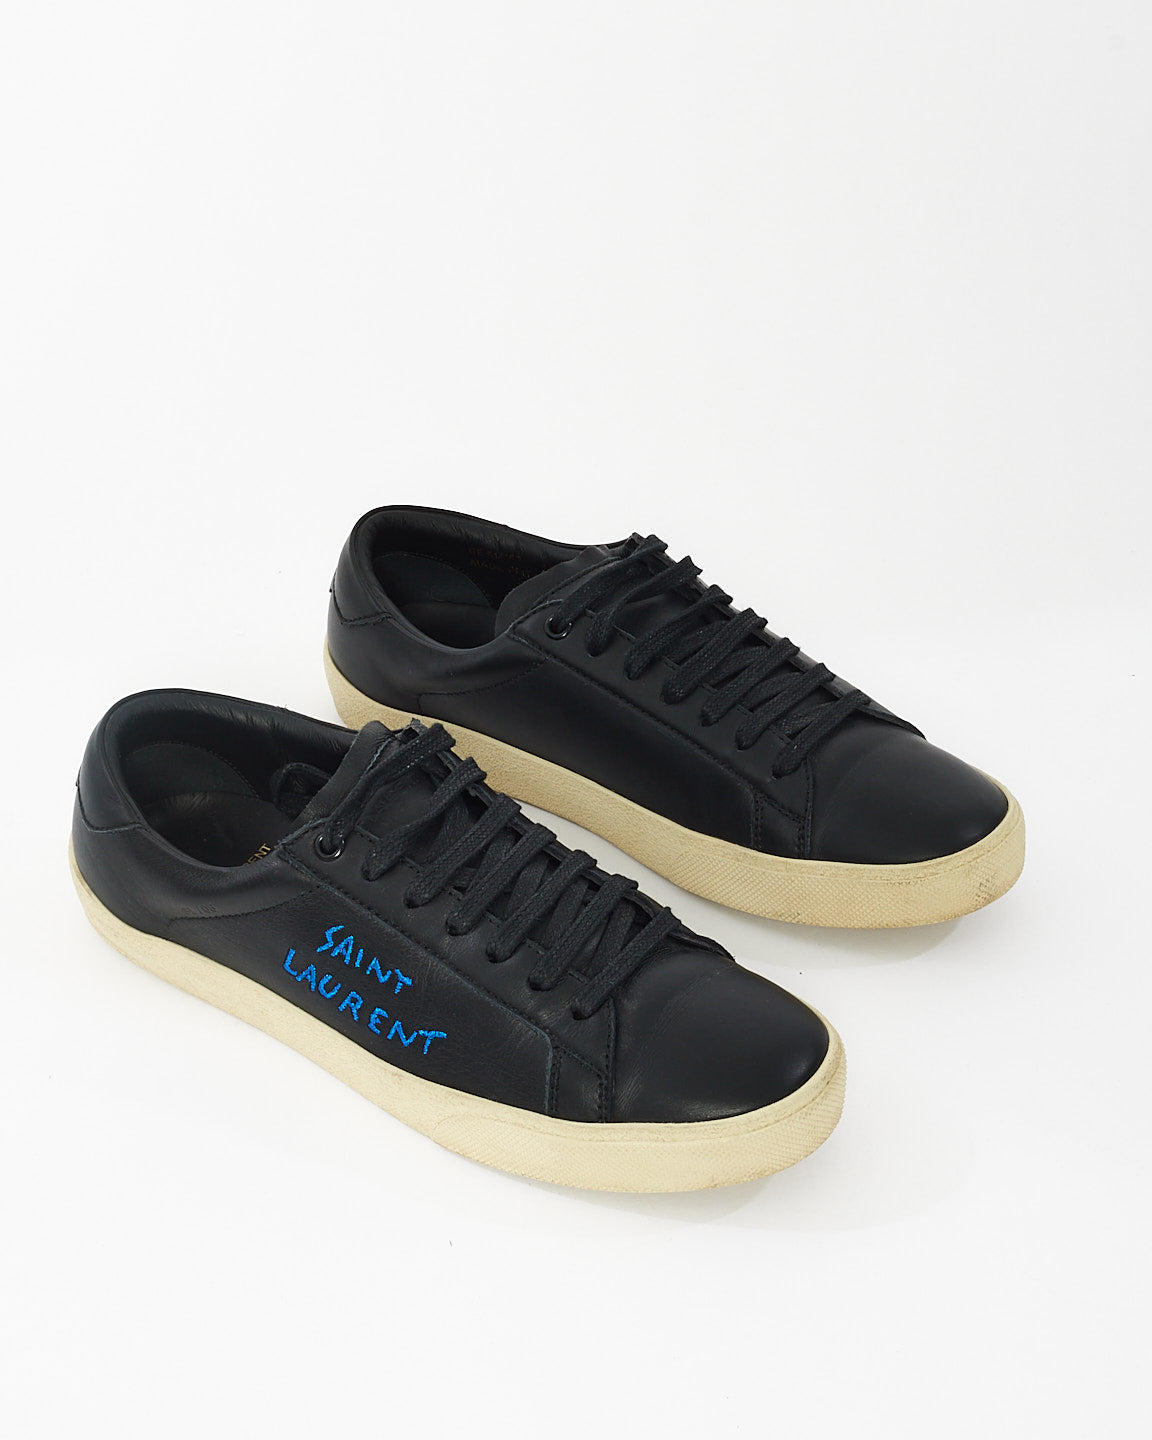 Saint Laurent Black Leather Blue Embroidered Sneakers - 41